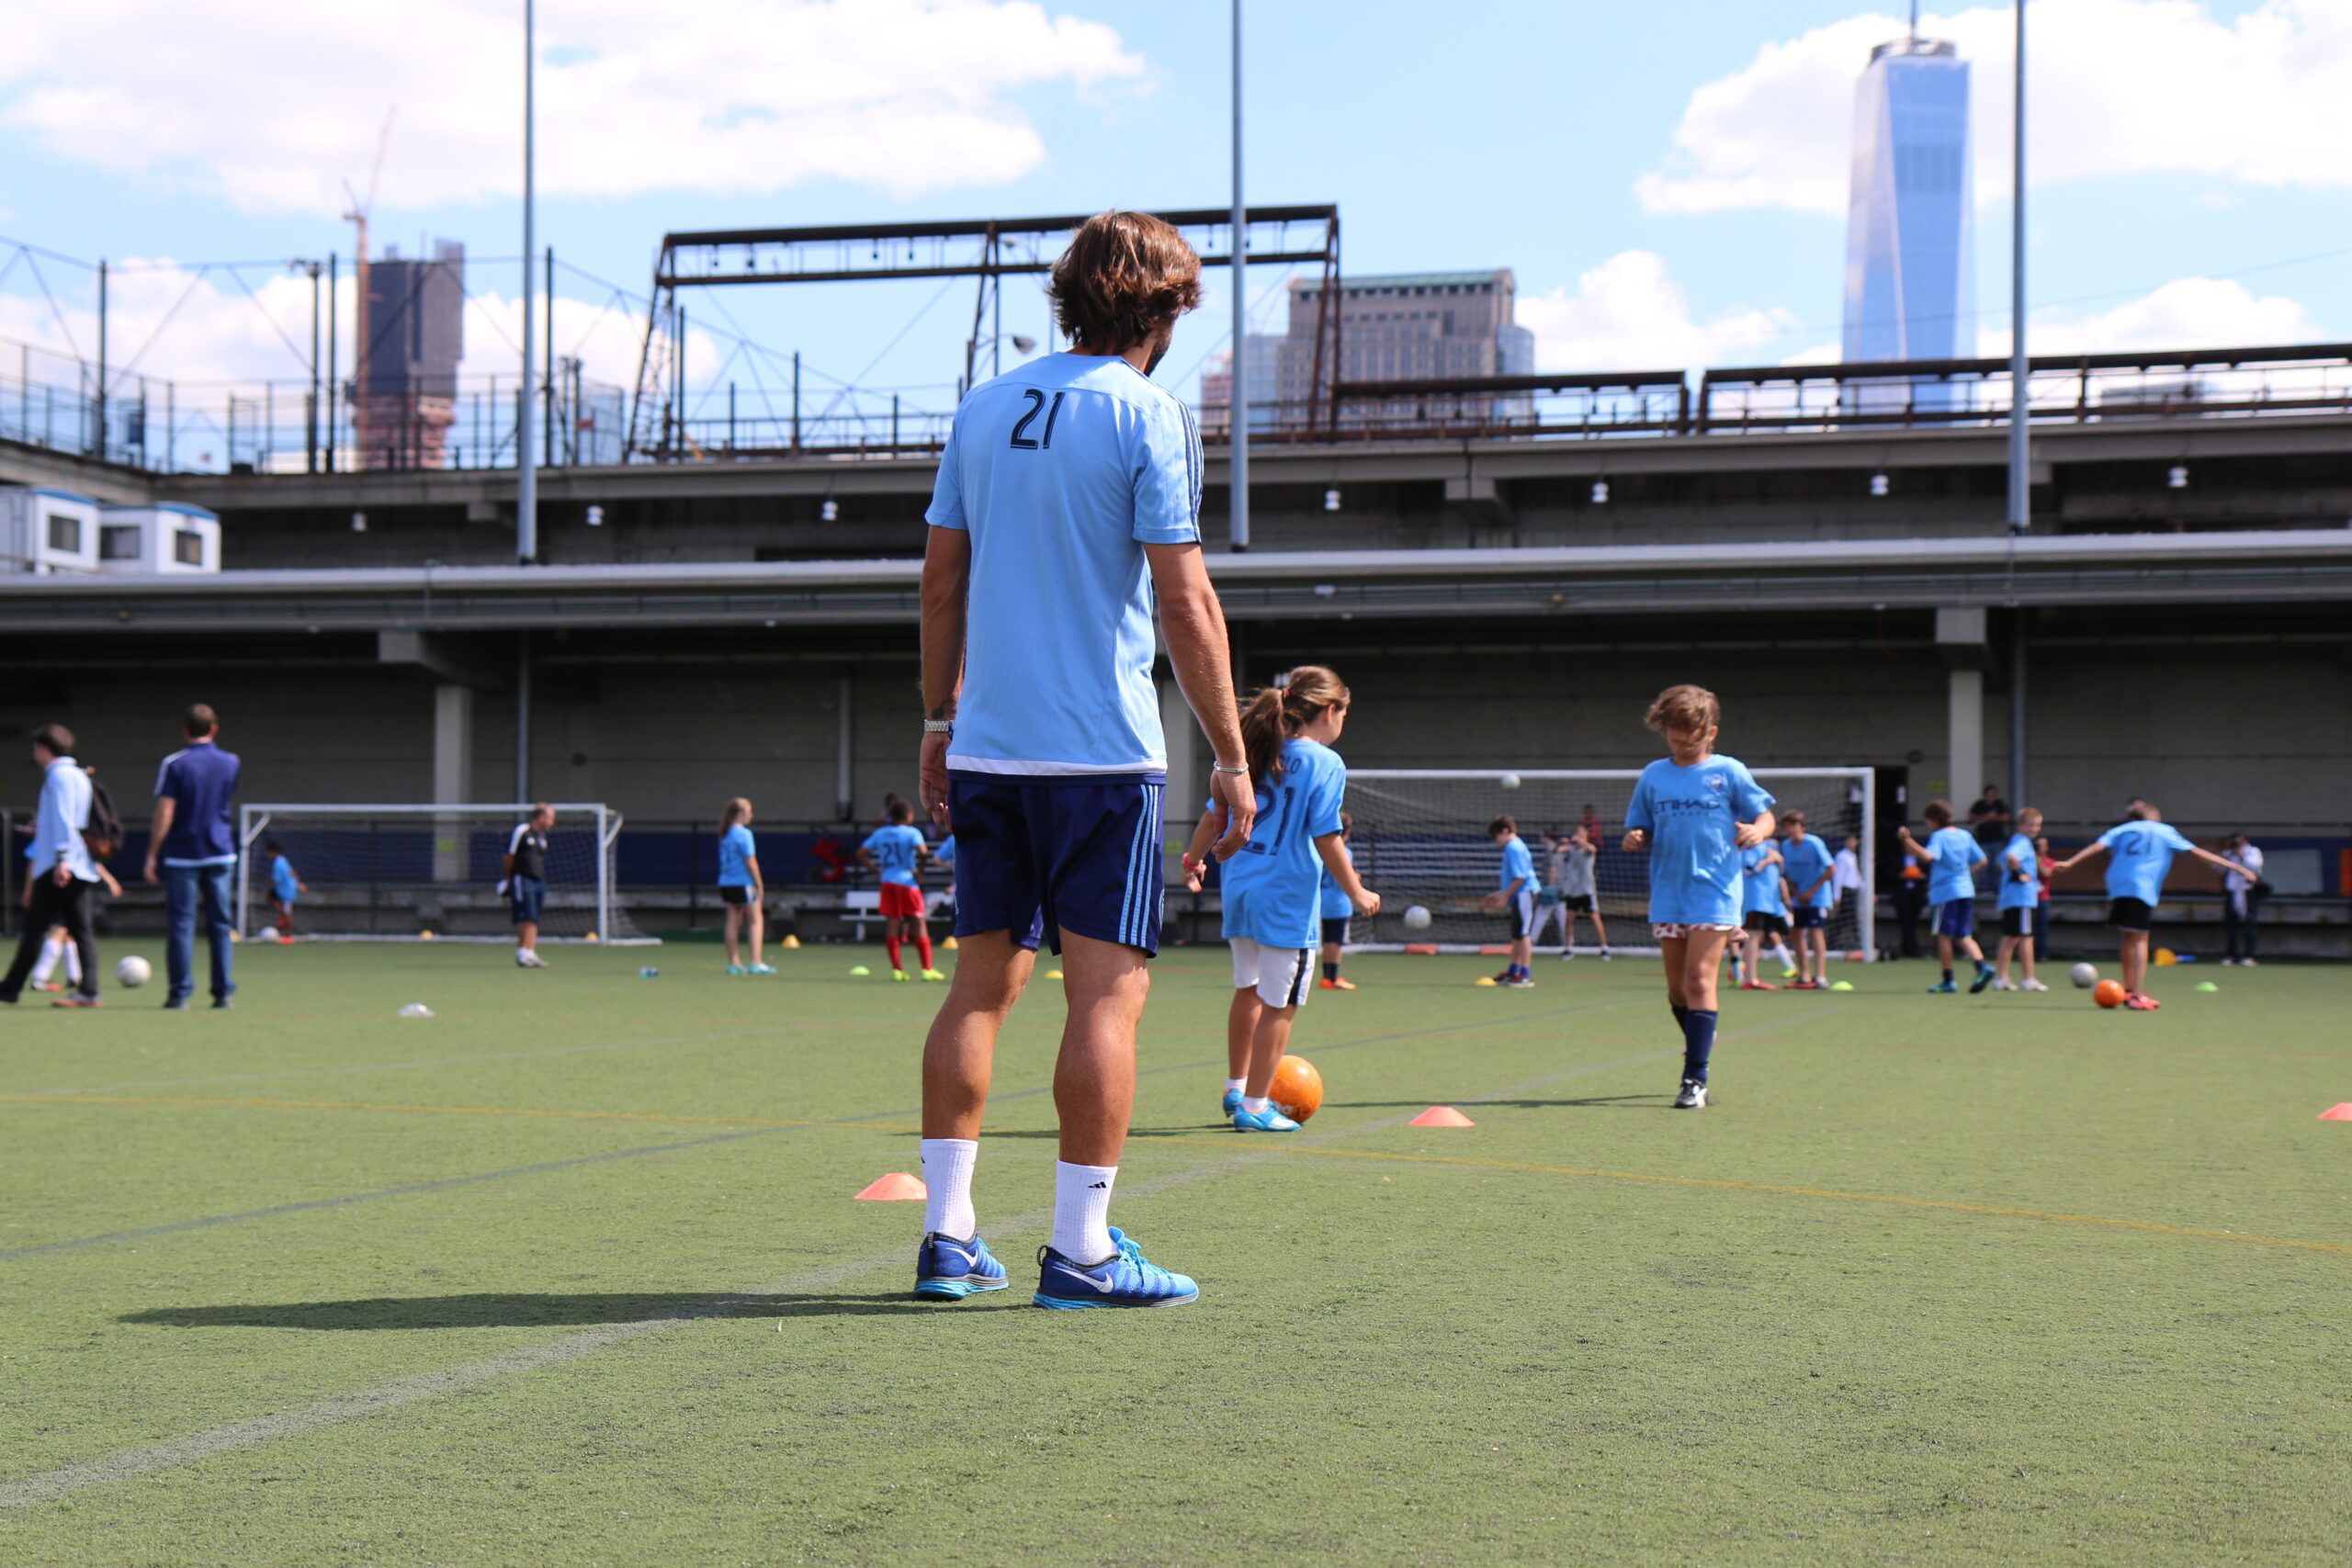 A youth soccer clinic on the Pier 40 athletic fields